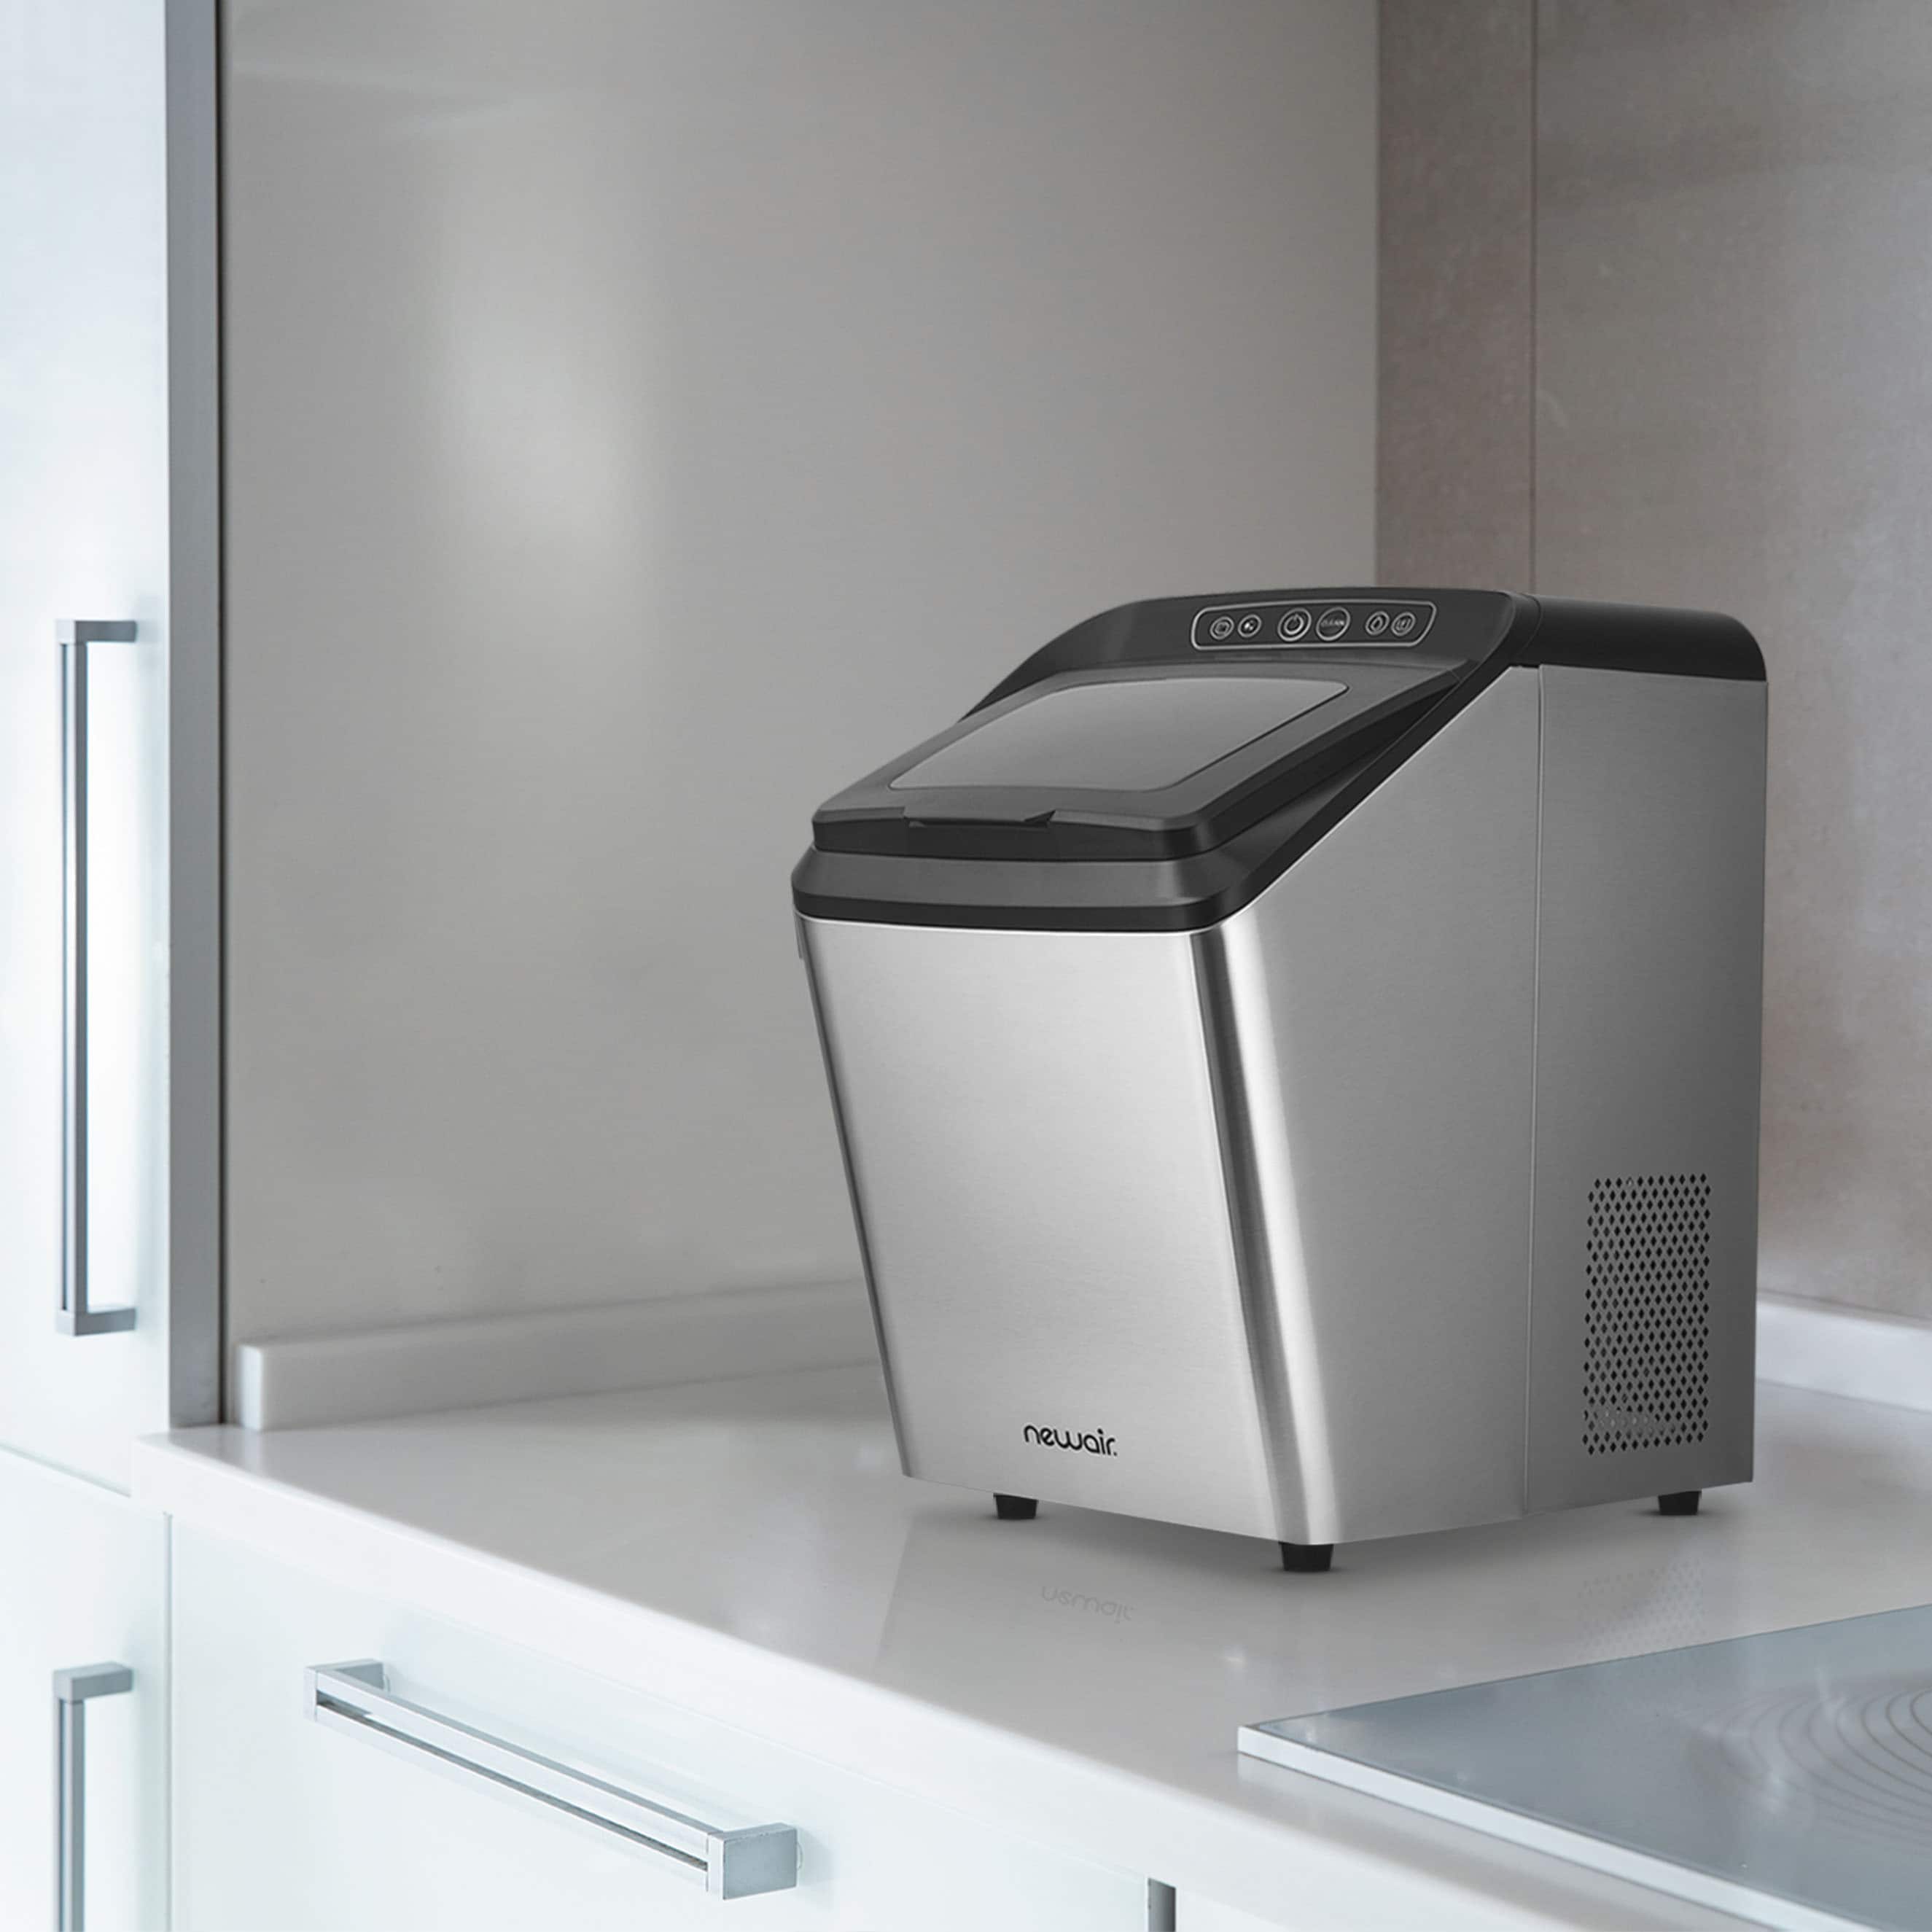 Say Goodbye to Boredom Eating with the Newair Nugget Ice Maker (NIM030SS00)